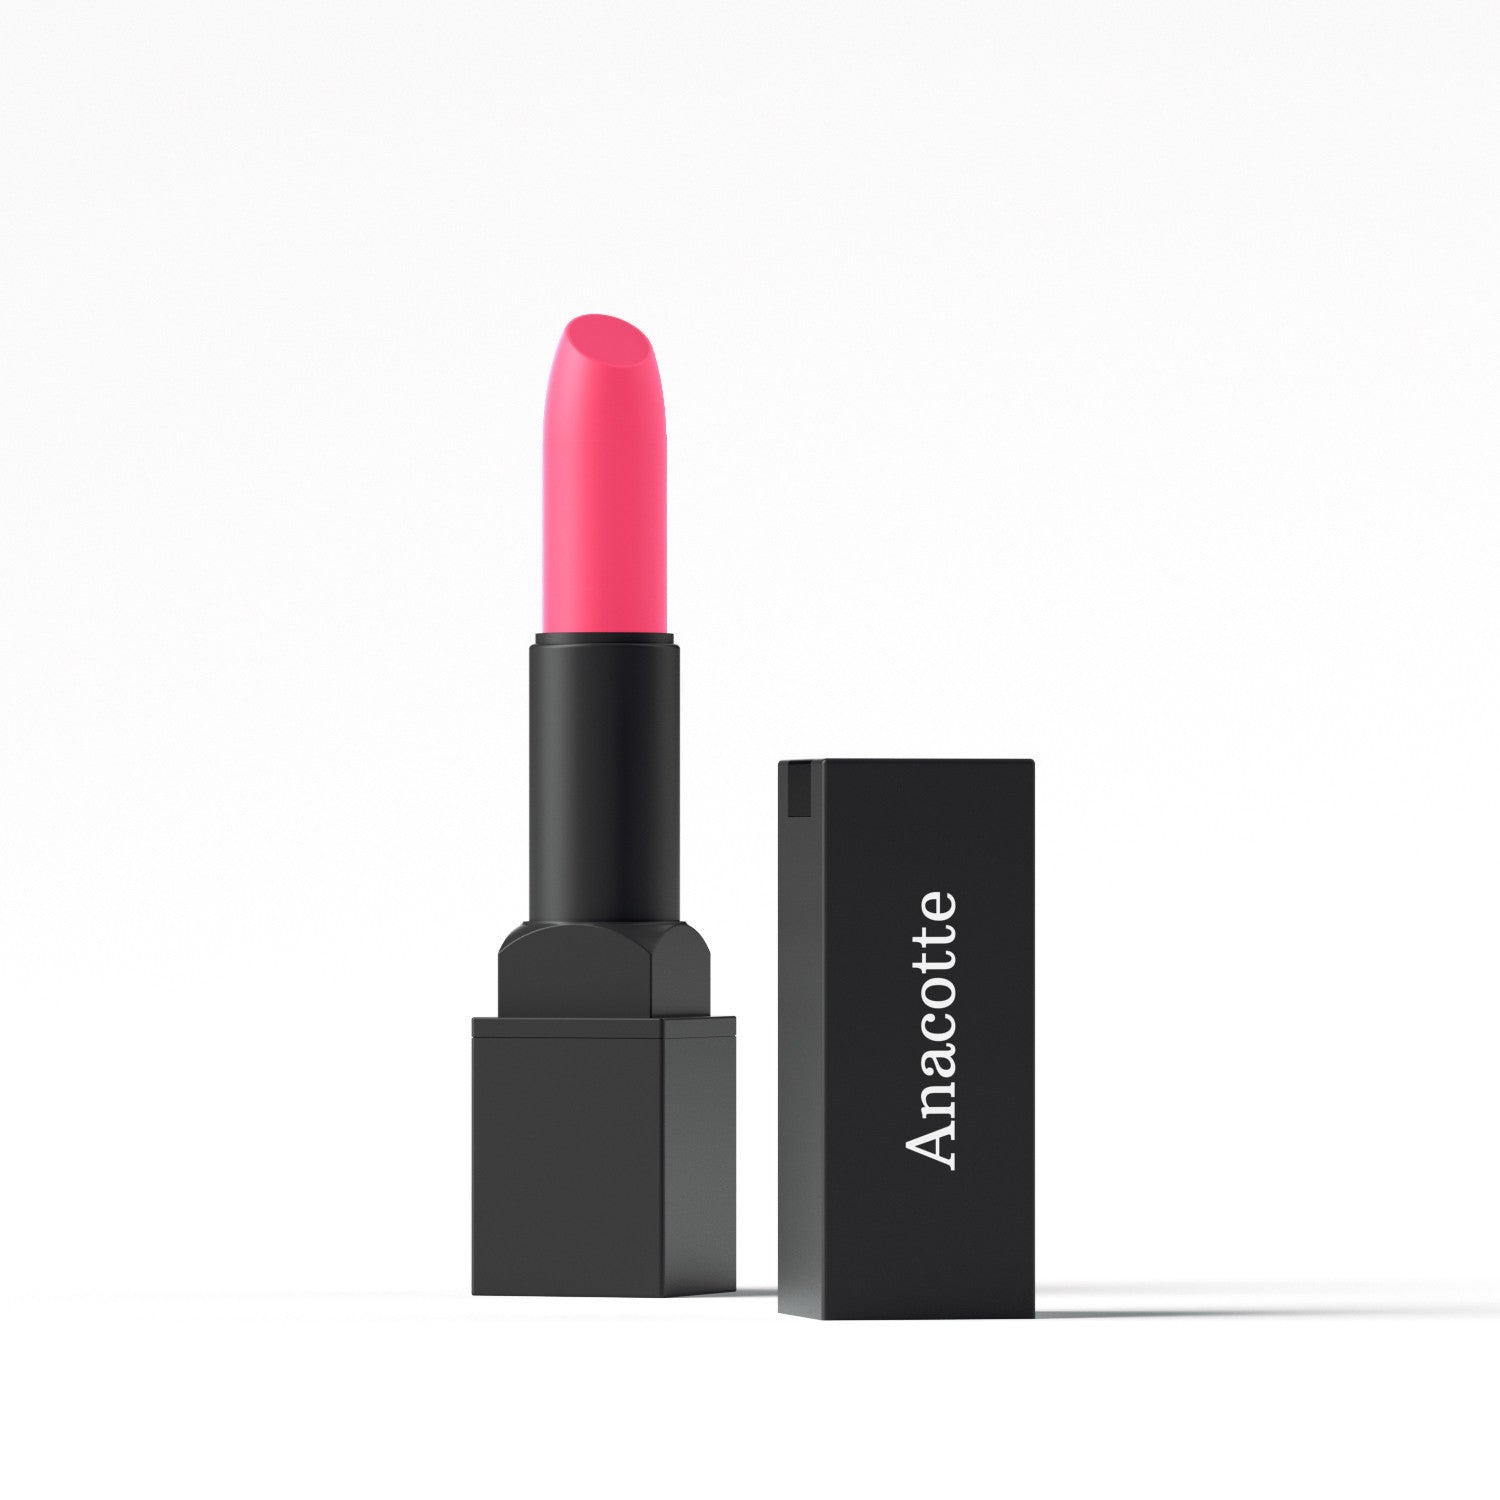 Anacotte Silky Smooth Lipstick: Enriched with Avocado Oil and Vitamin E